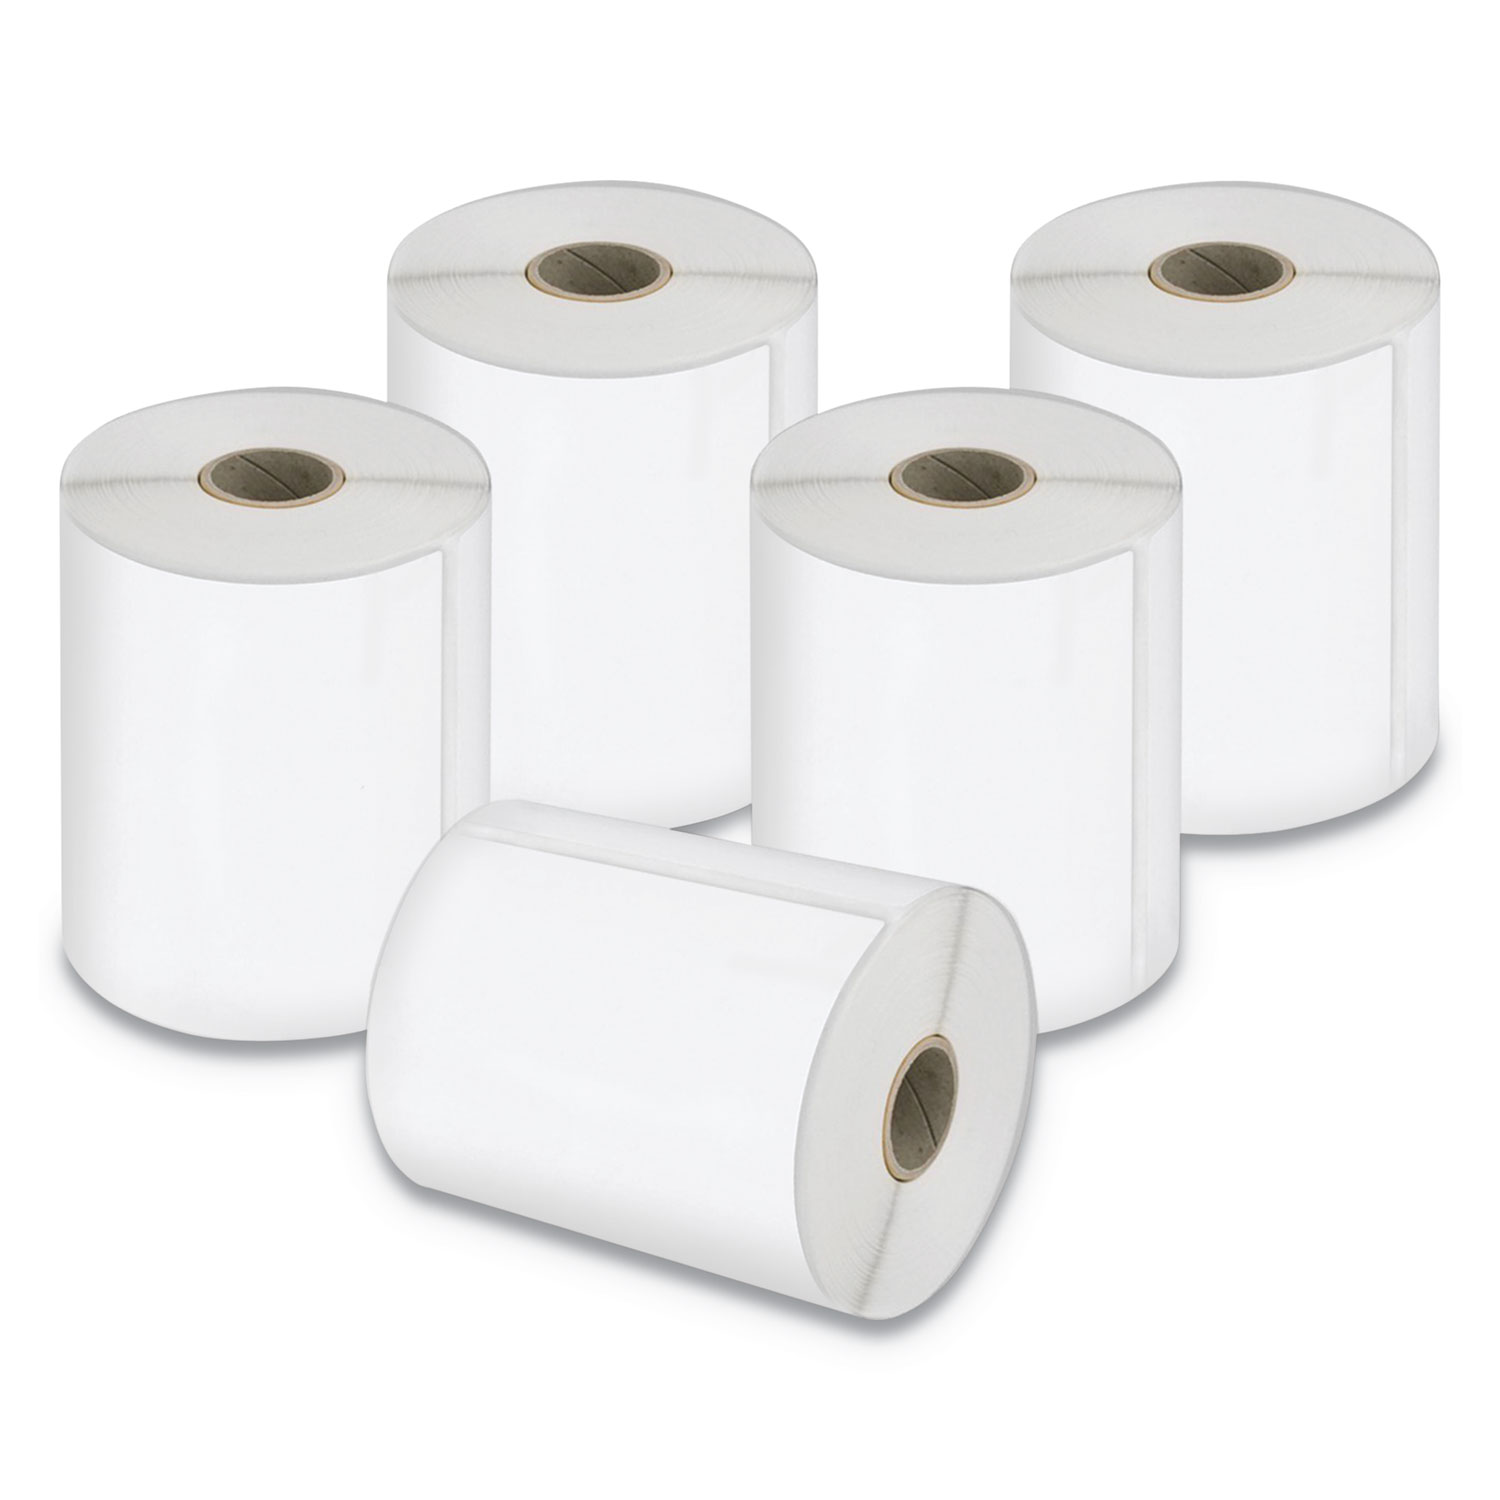  DYMO 2026404 LW Extra-Large Shipping Labels, 4 x 6, White, 220/Roll, 5 Rolls/Pack (DYM2026404) 